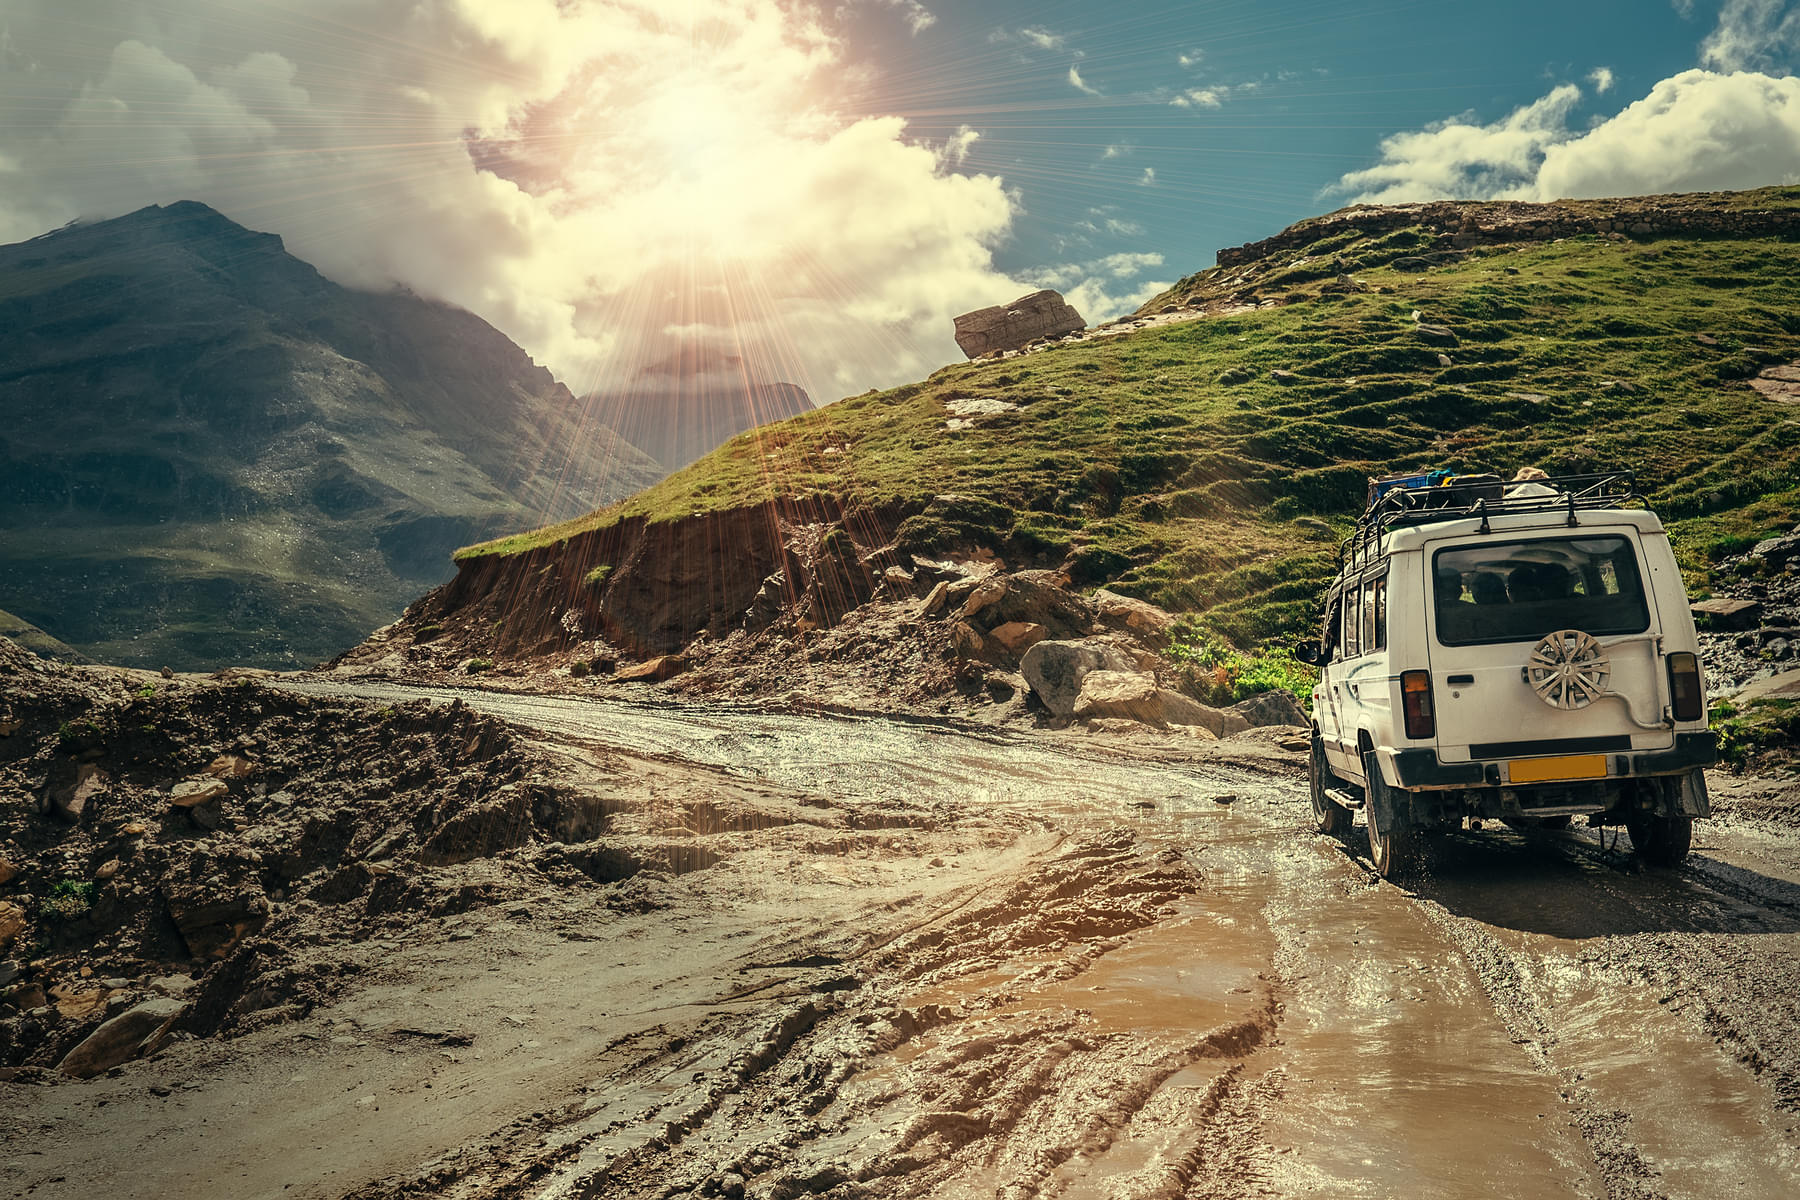 Drive through the challenging terrains of Himalayas